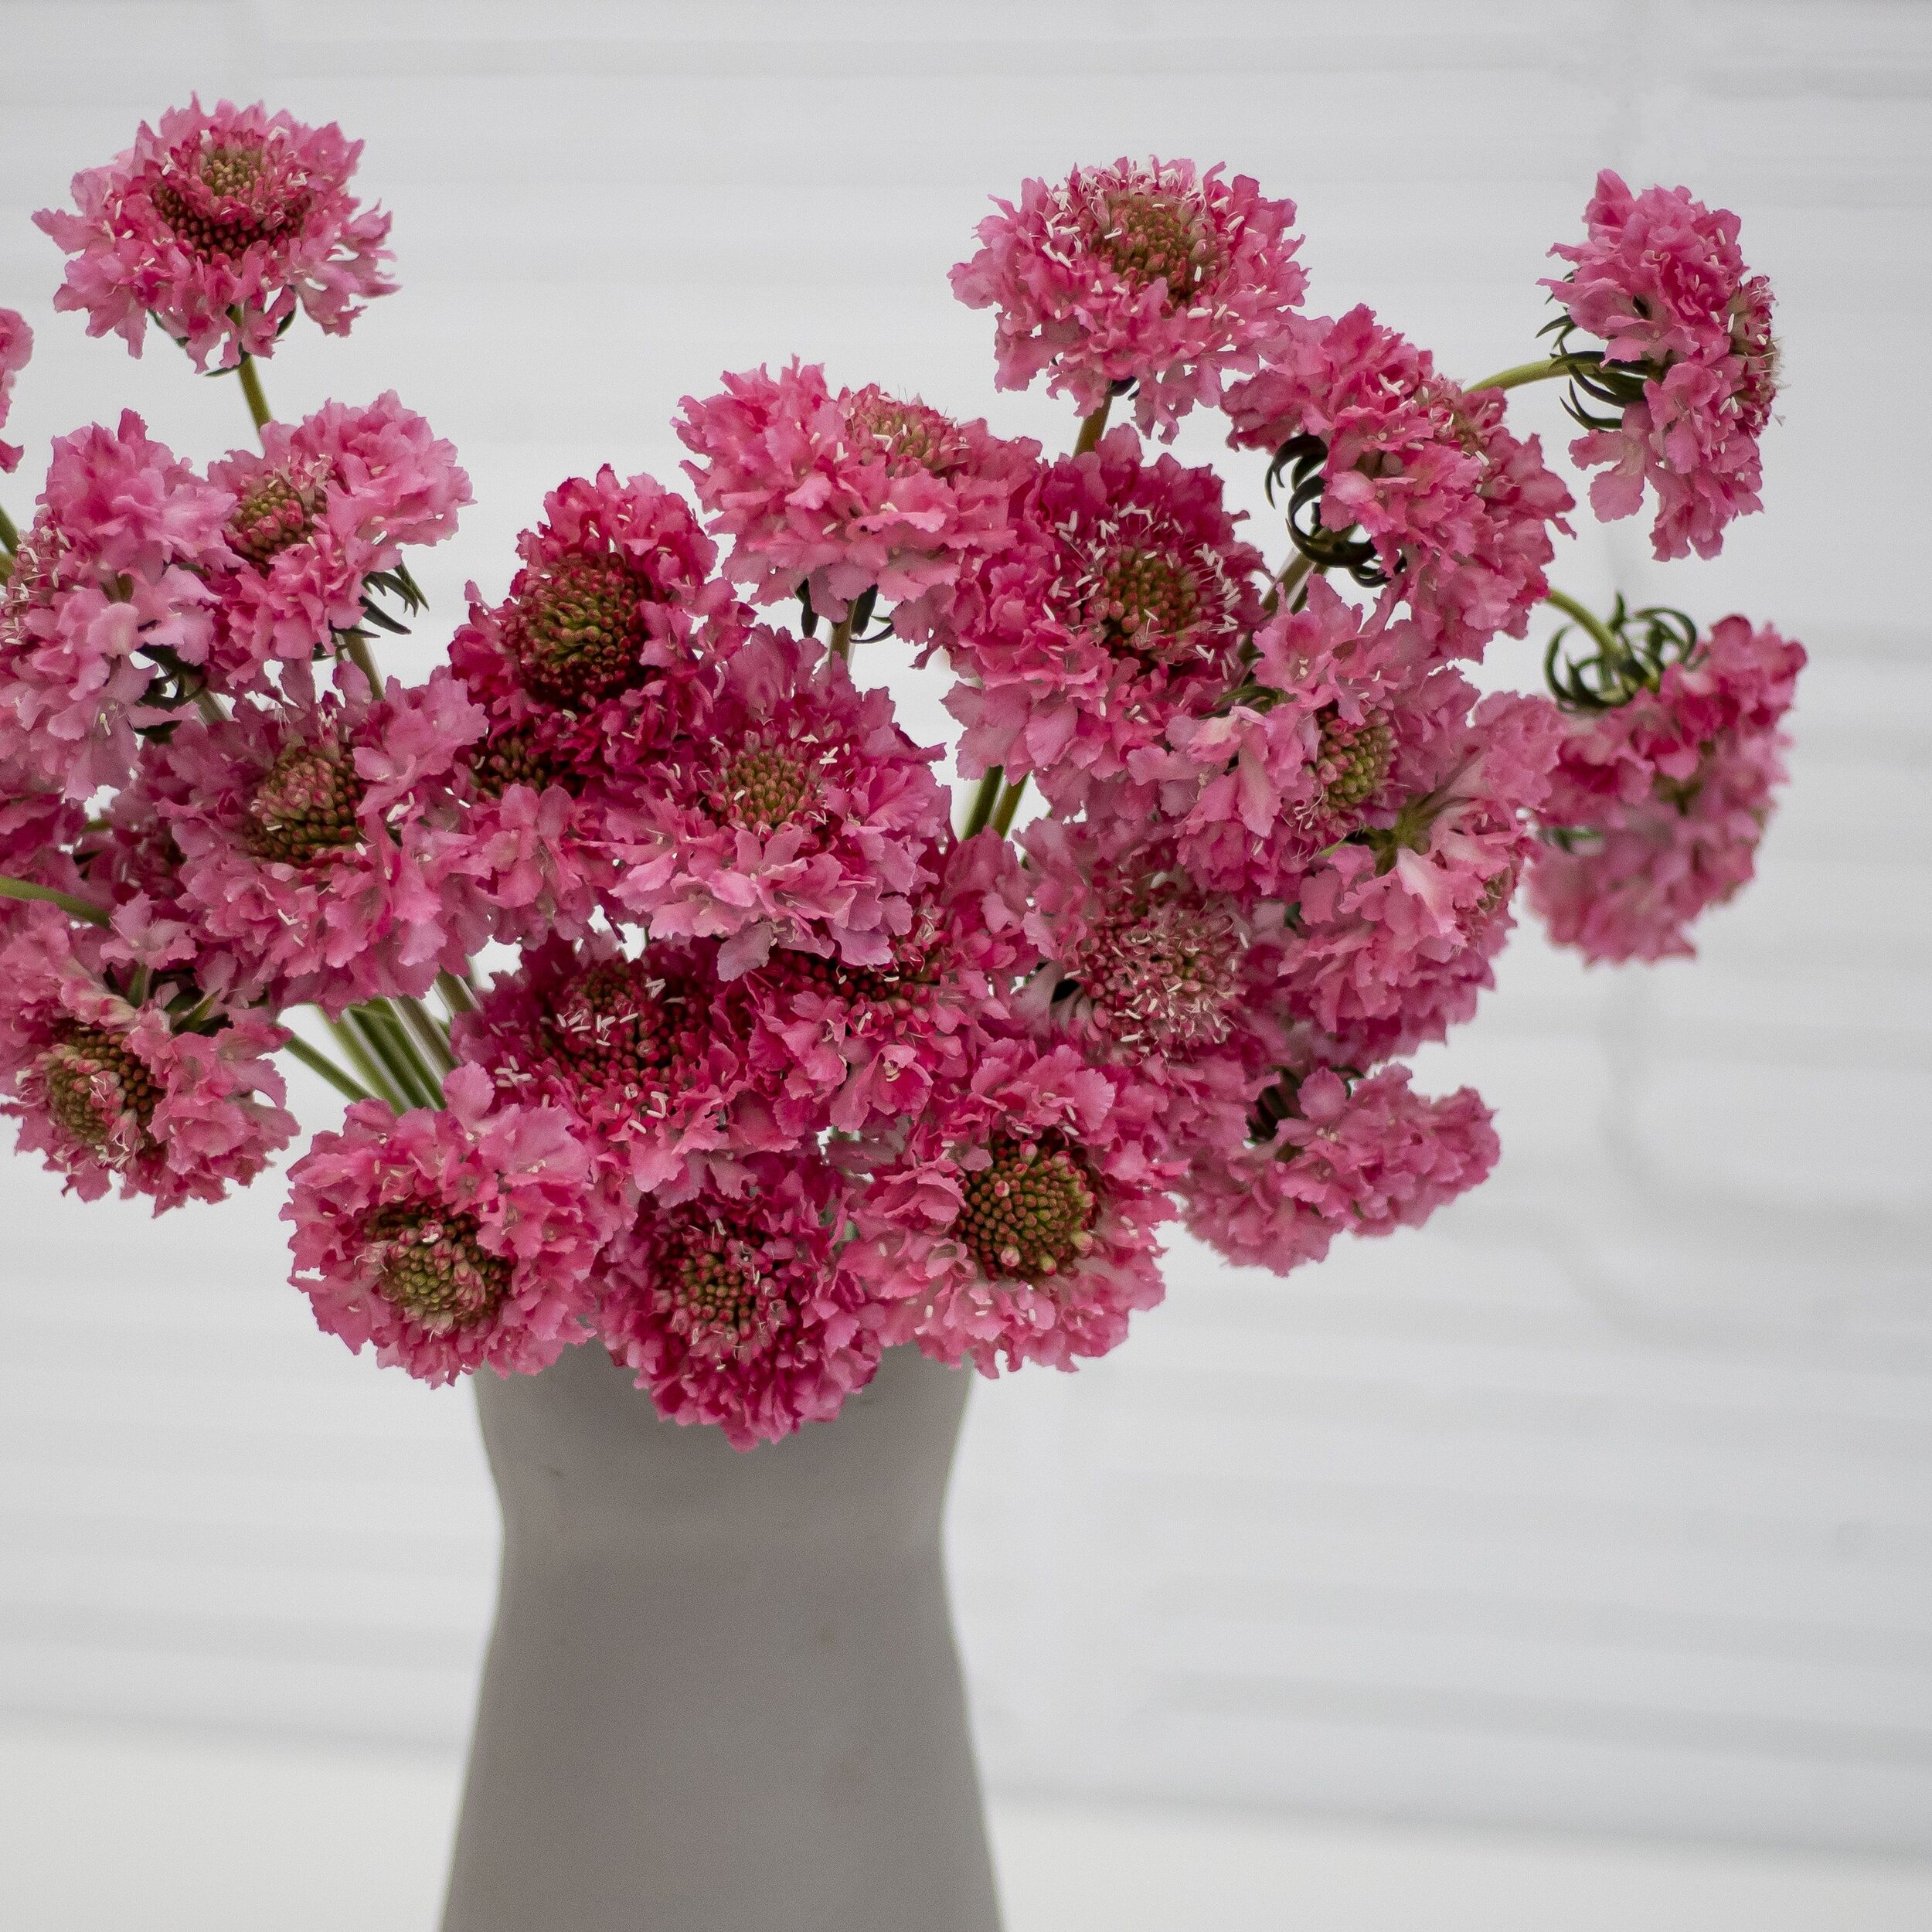 A closeup of pink scabiosa flowers in a stone vase